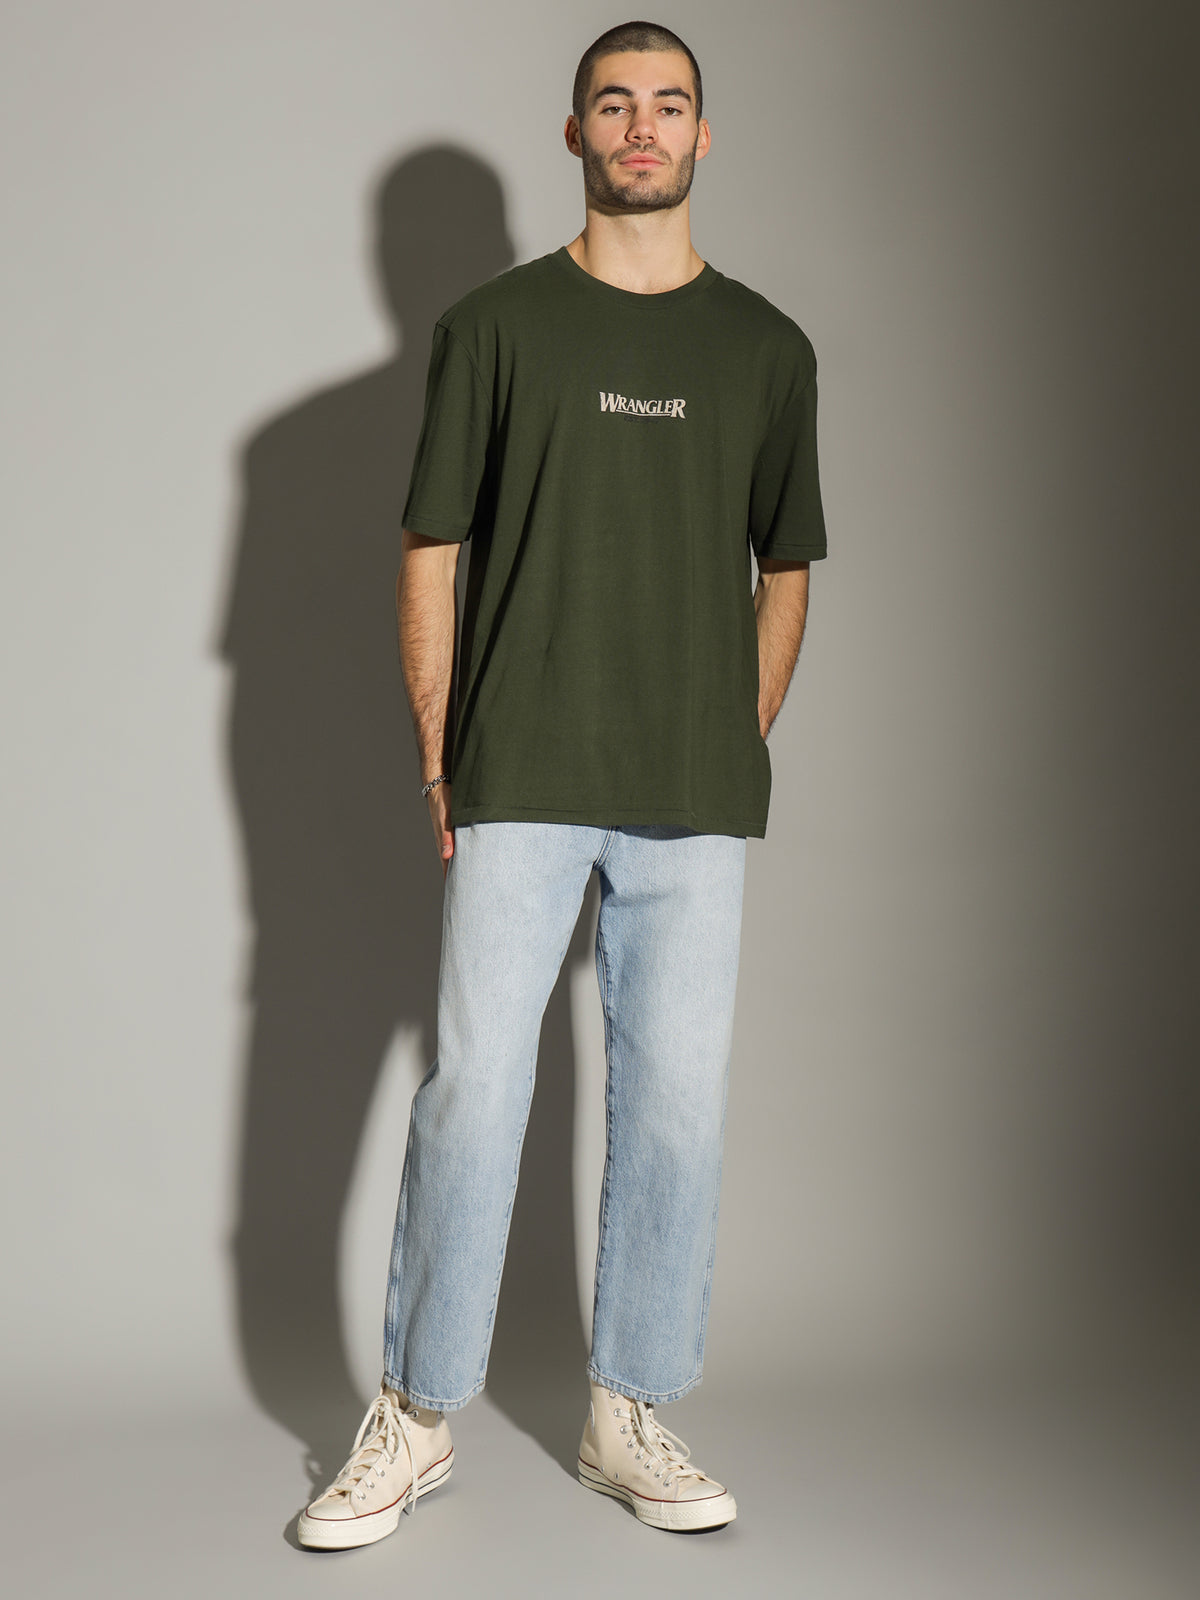 Wrangler Baggy T-Shirt in Forest Green